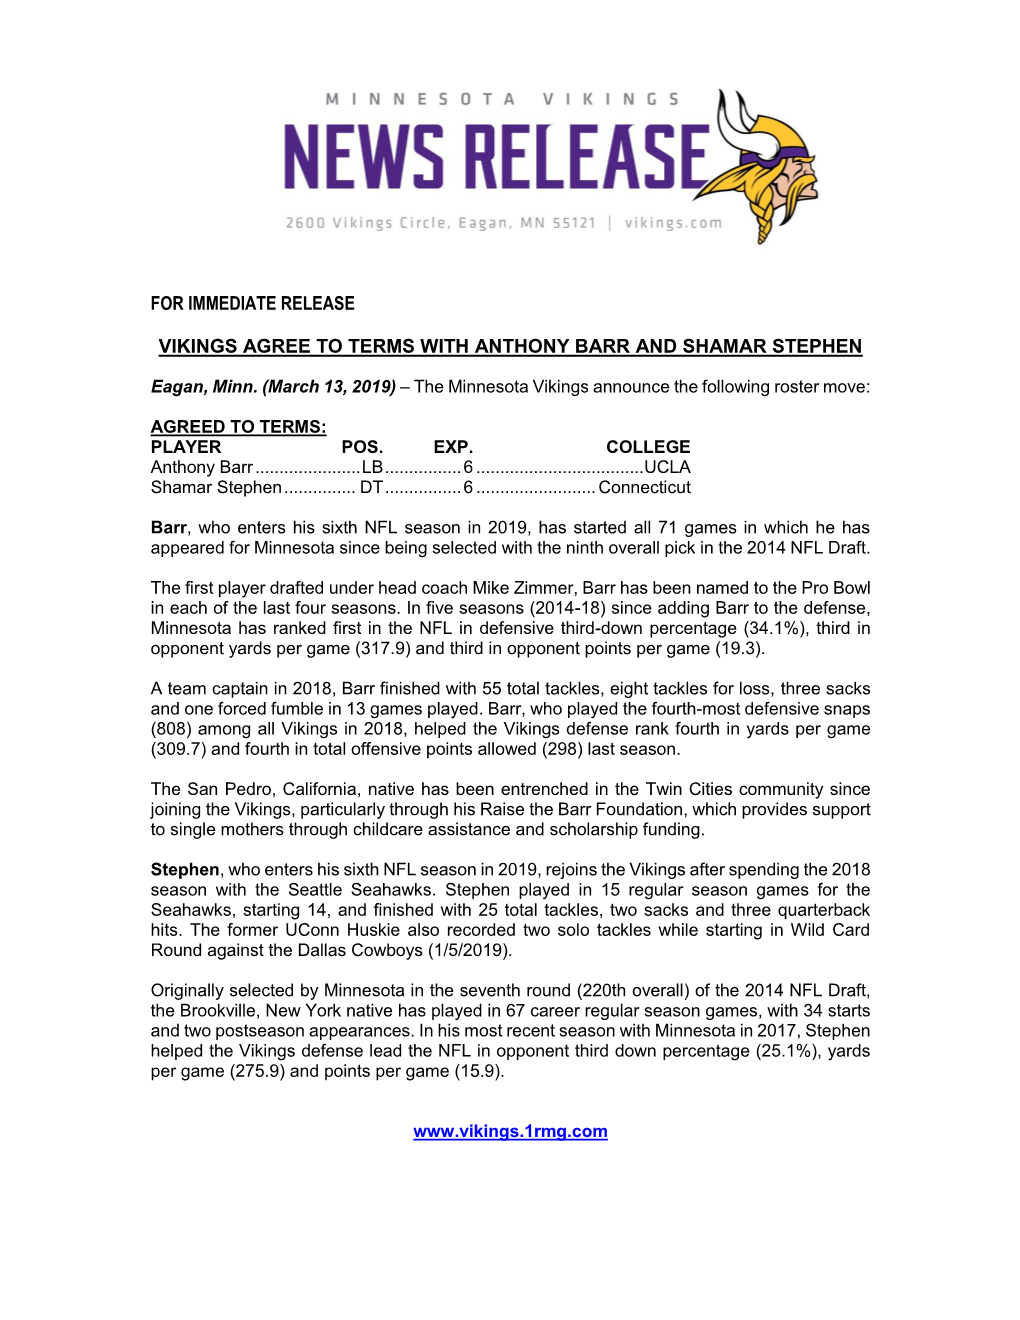 For Immediate Release Vikings Agree to Terms With